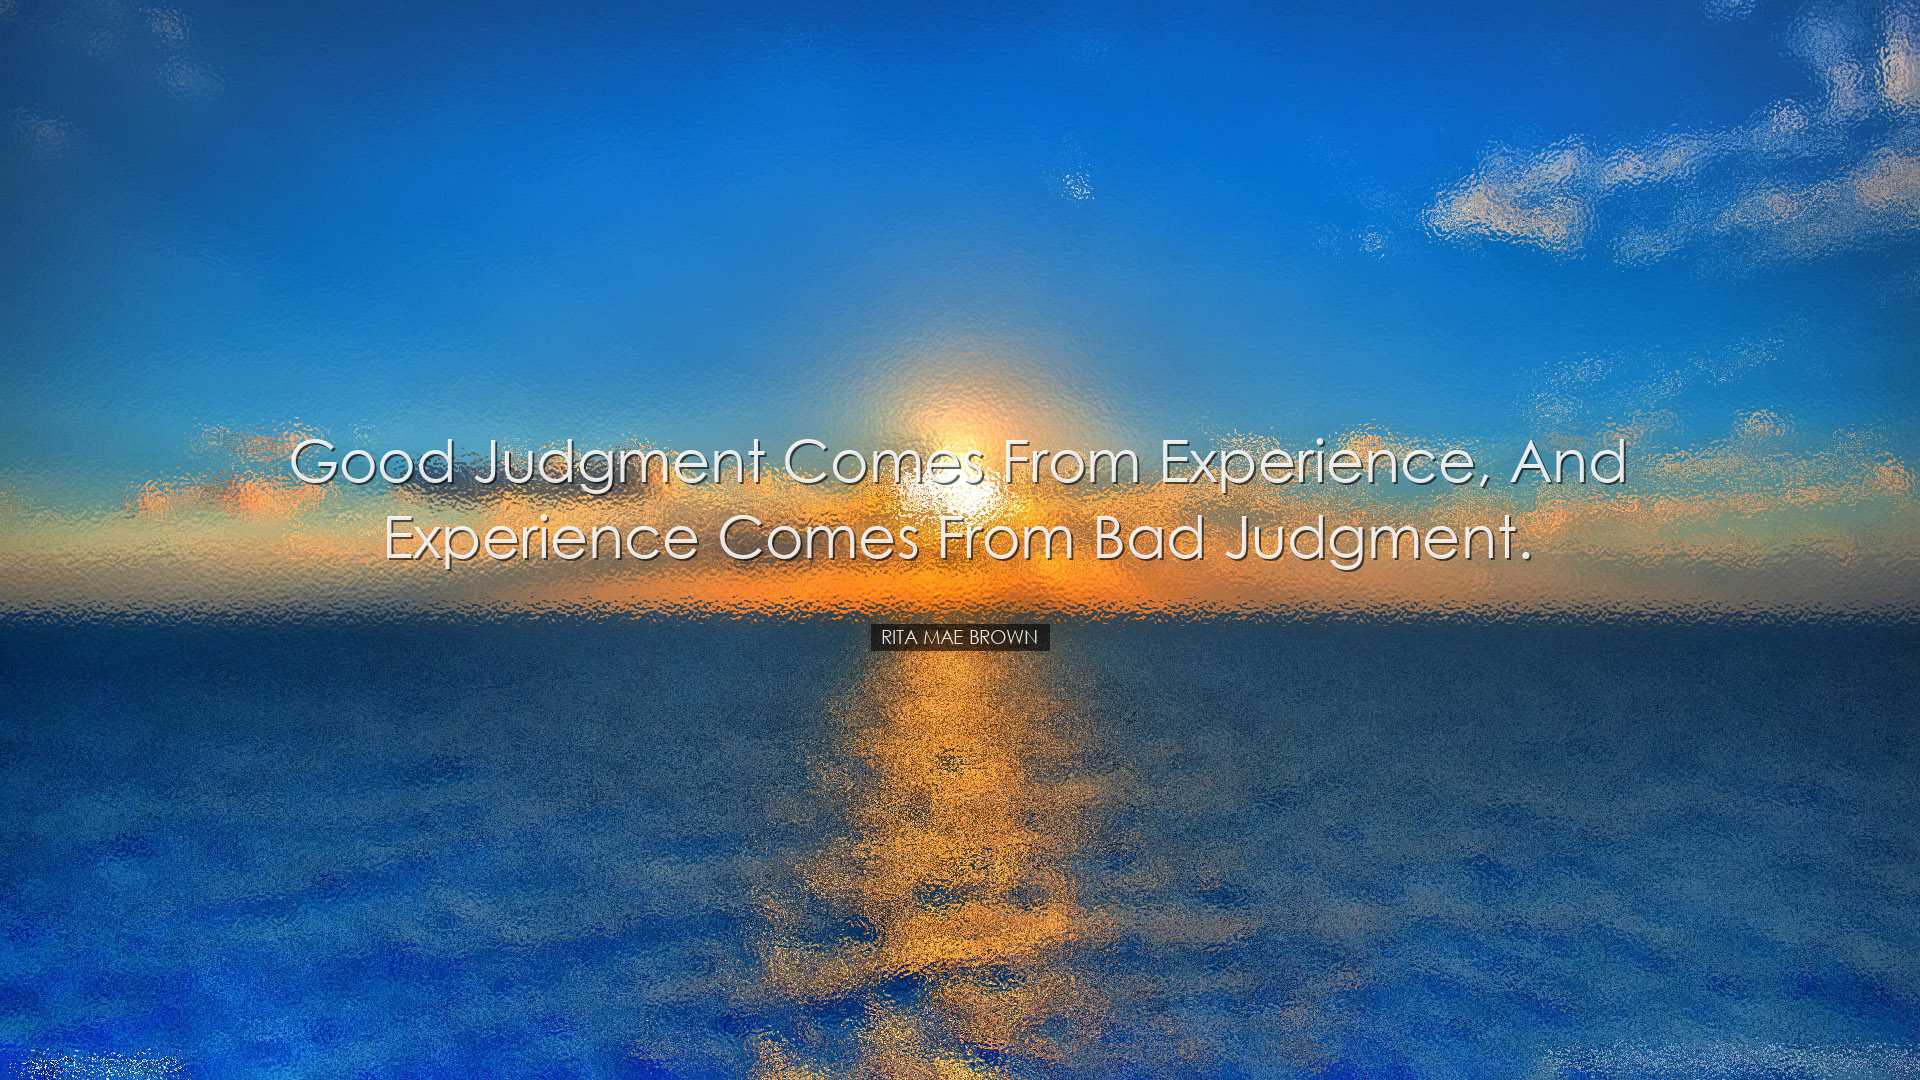 Good judgment comes from experience, and experience comes from bad